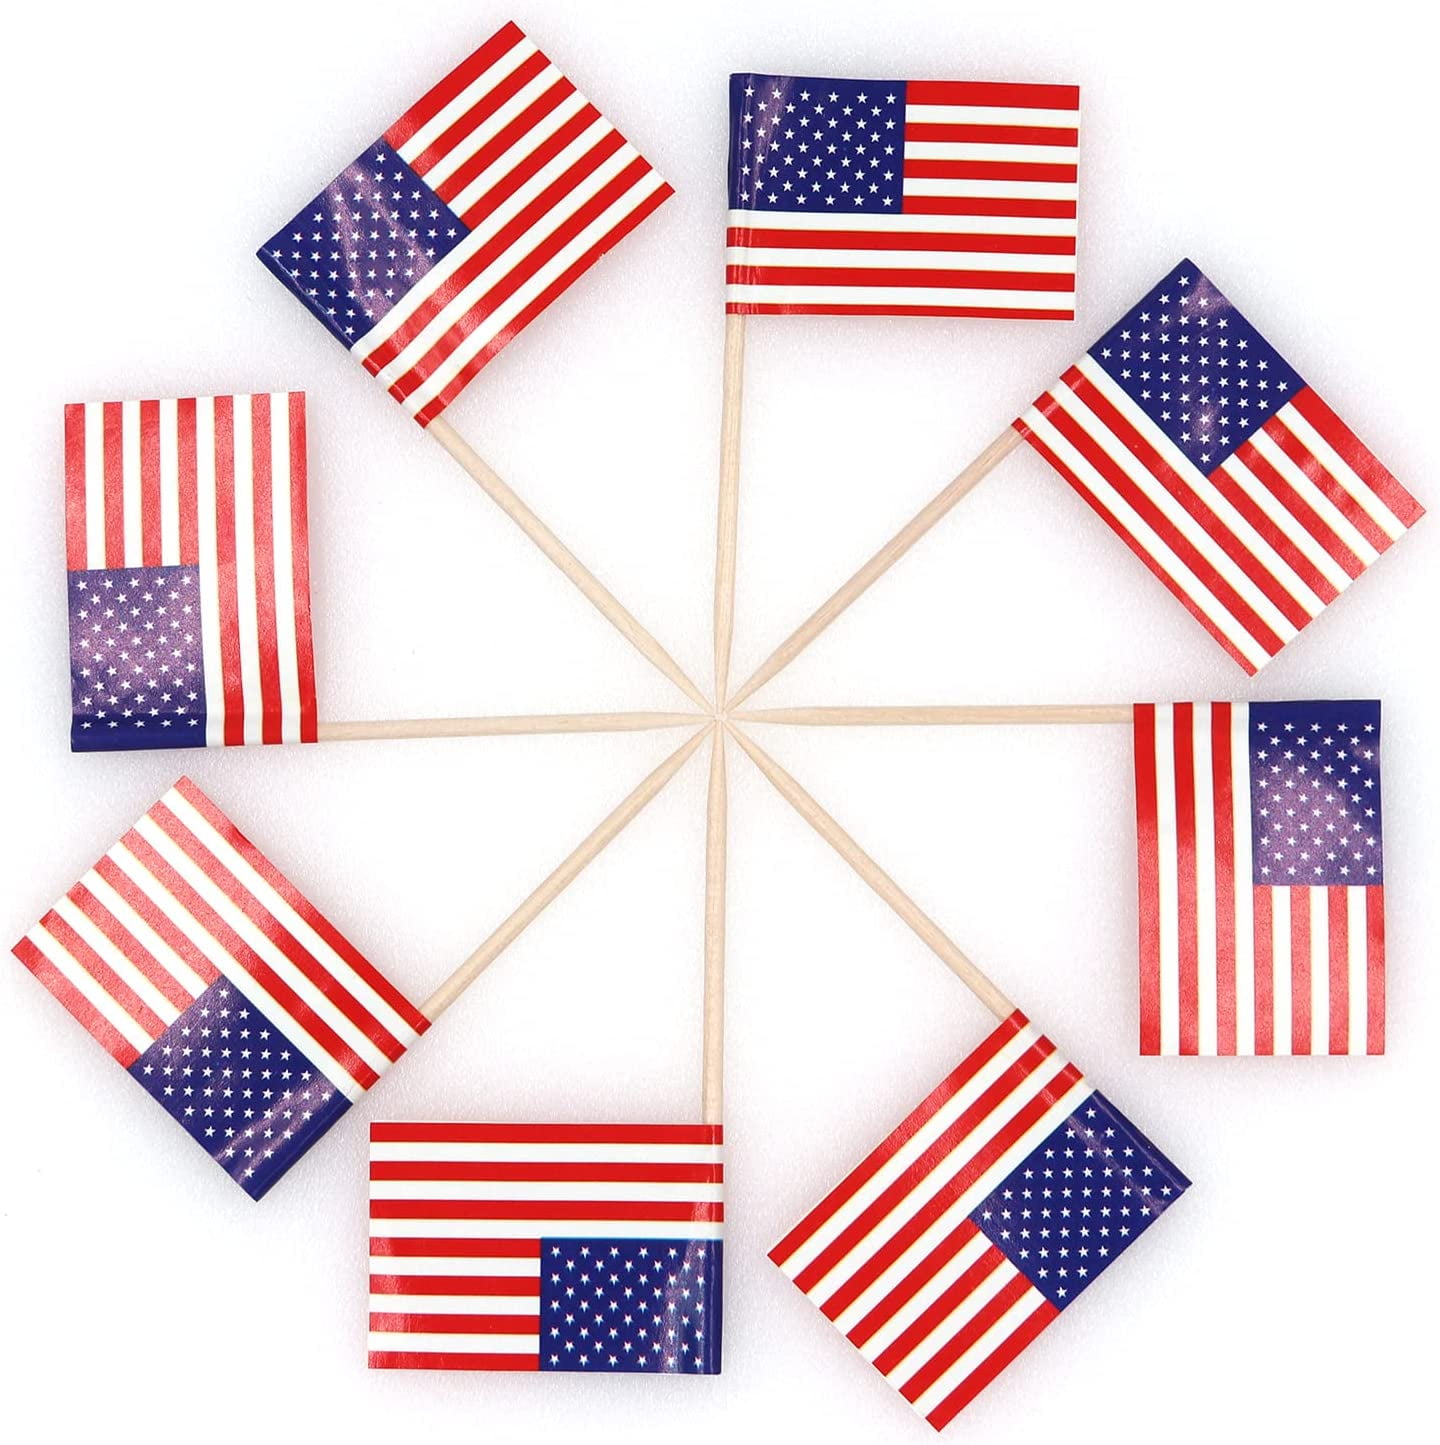 Other Event Party Supplies Set Toothpick Flag Customized Any Design Small  Cupcake Toppers Cocktail Sticks Celebration Cheering Props 230928 From  Kang09, $10.34